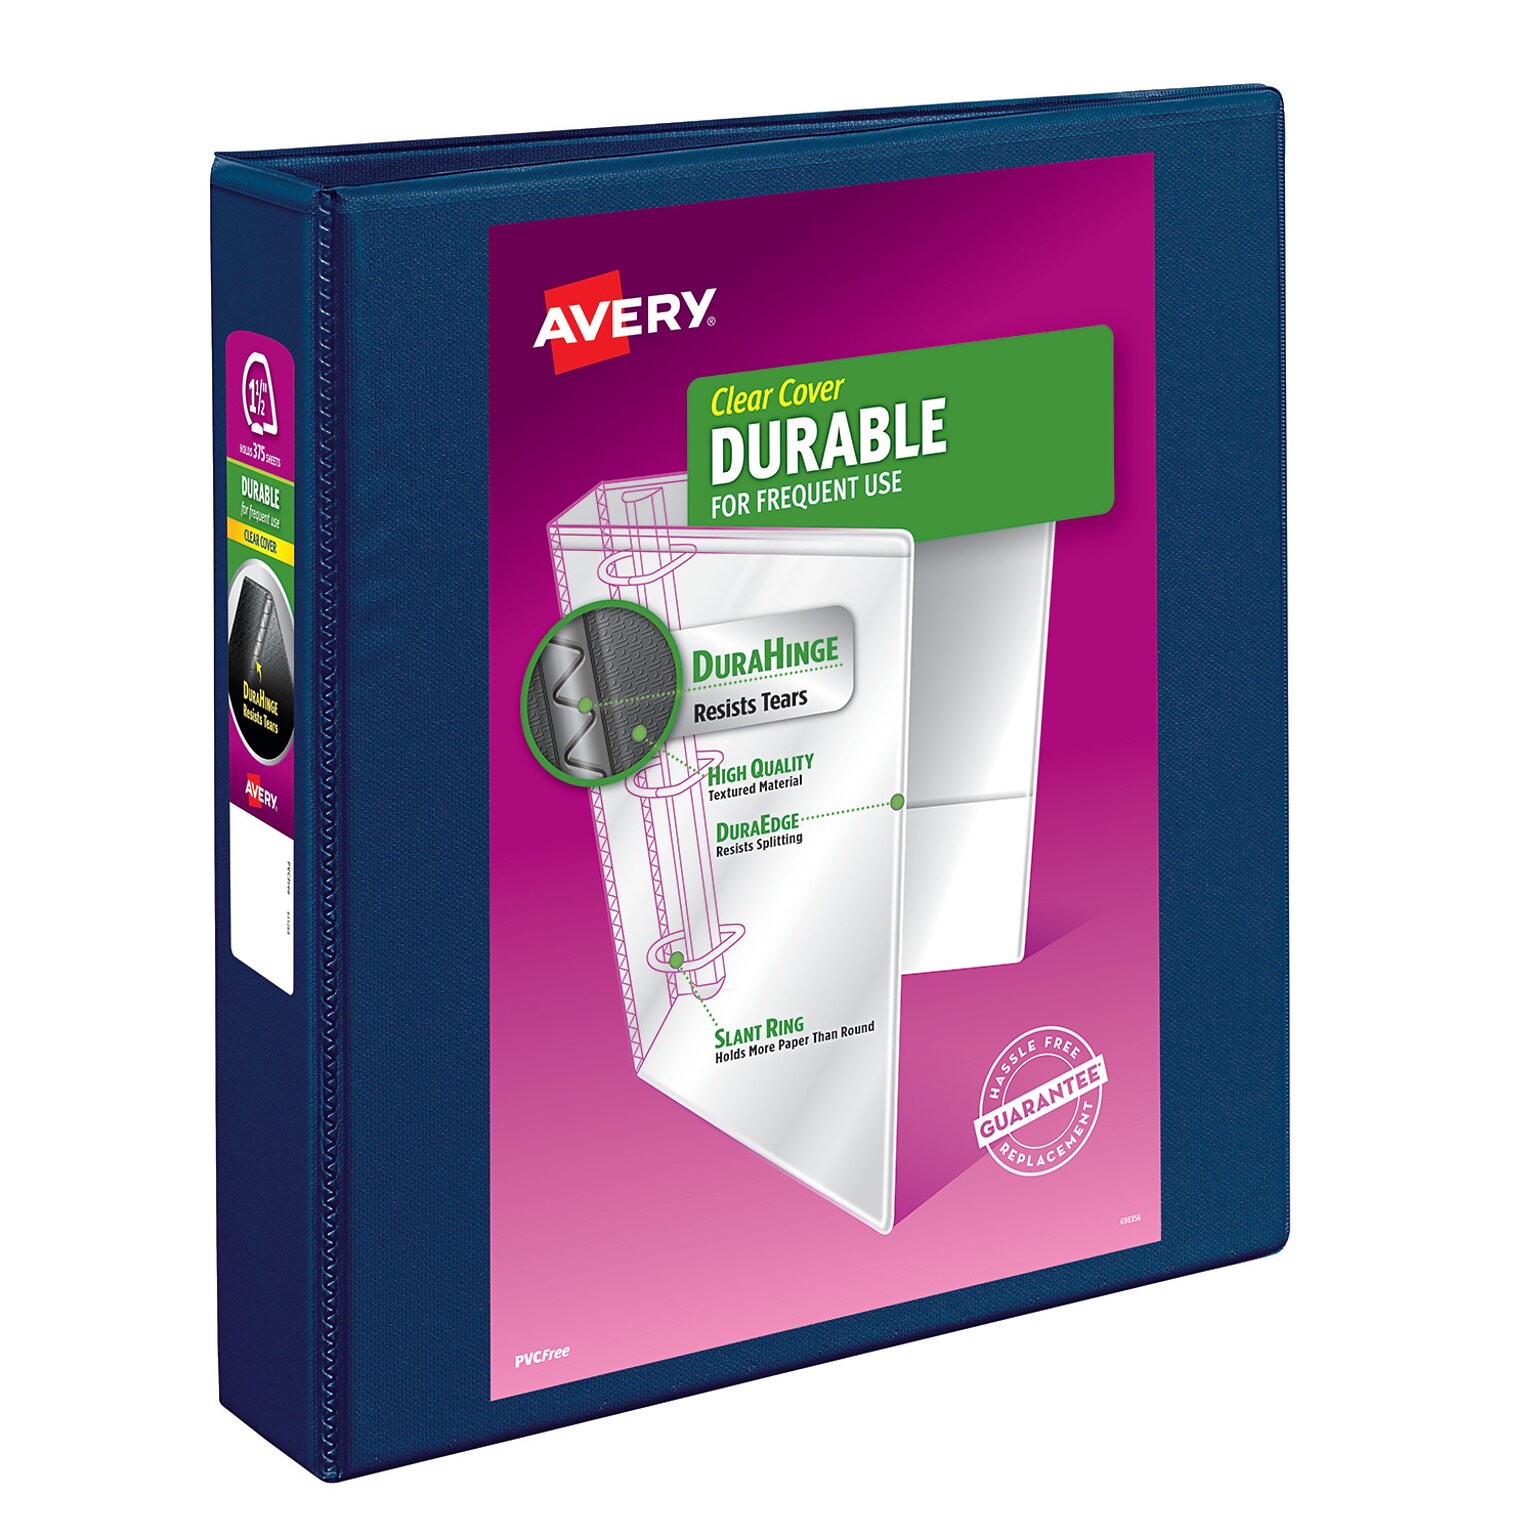 Avery Durable 1 1/2 3-Ring View Binders, Slant Ring, Navy Blue (17024)